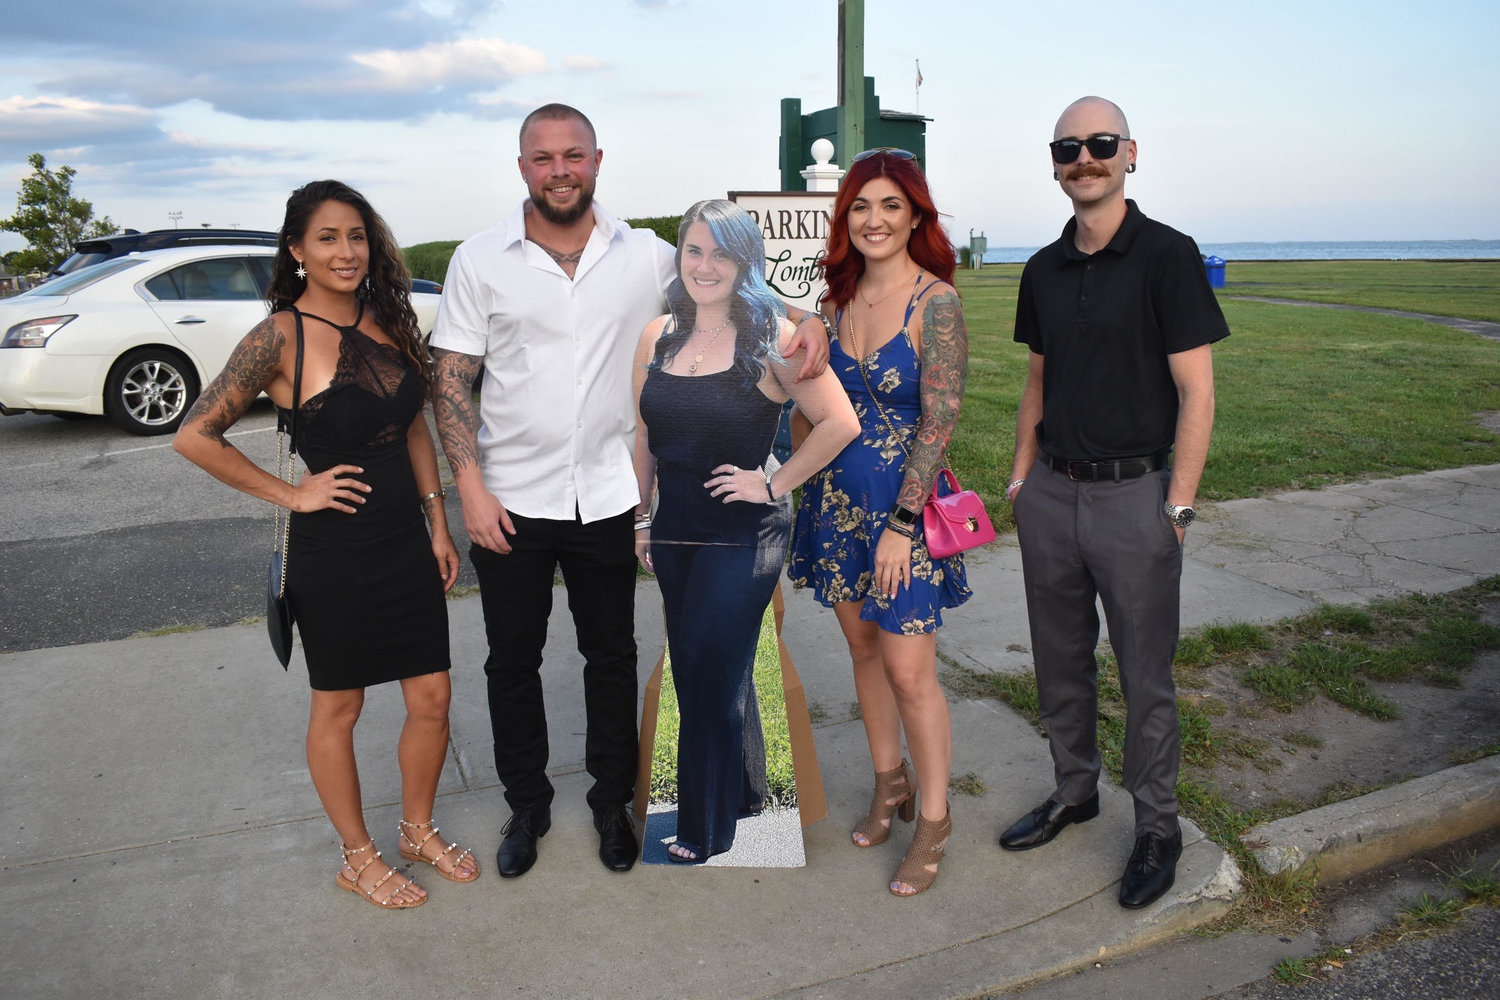 Pictured are (left to right) Brianca Donovan, Matt Gajewski, Krystina Kateridge and Jason Henriques; in the middle is a cardboard cutout picture of Desiree Errigo, a friend and fellow 2011 graduate who could not be at the reunion. Kateridge had the cutout made and asked any friends who took a photo of the cutout to tag Errigo on Instagram.